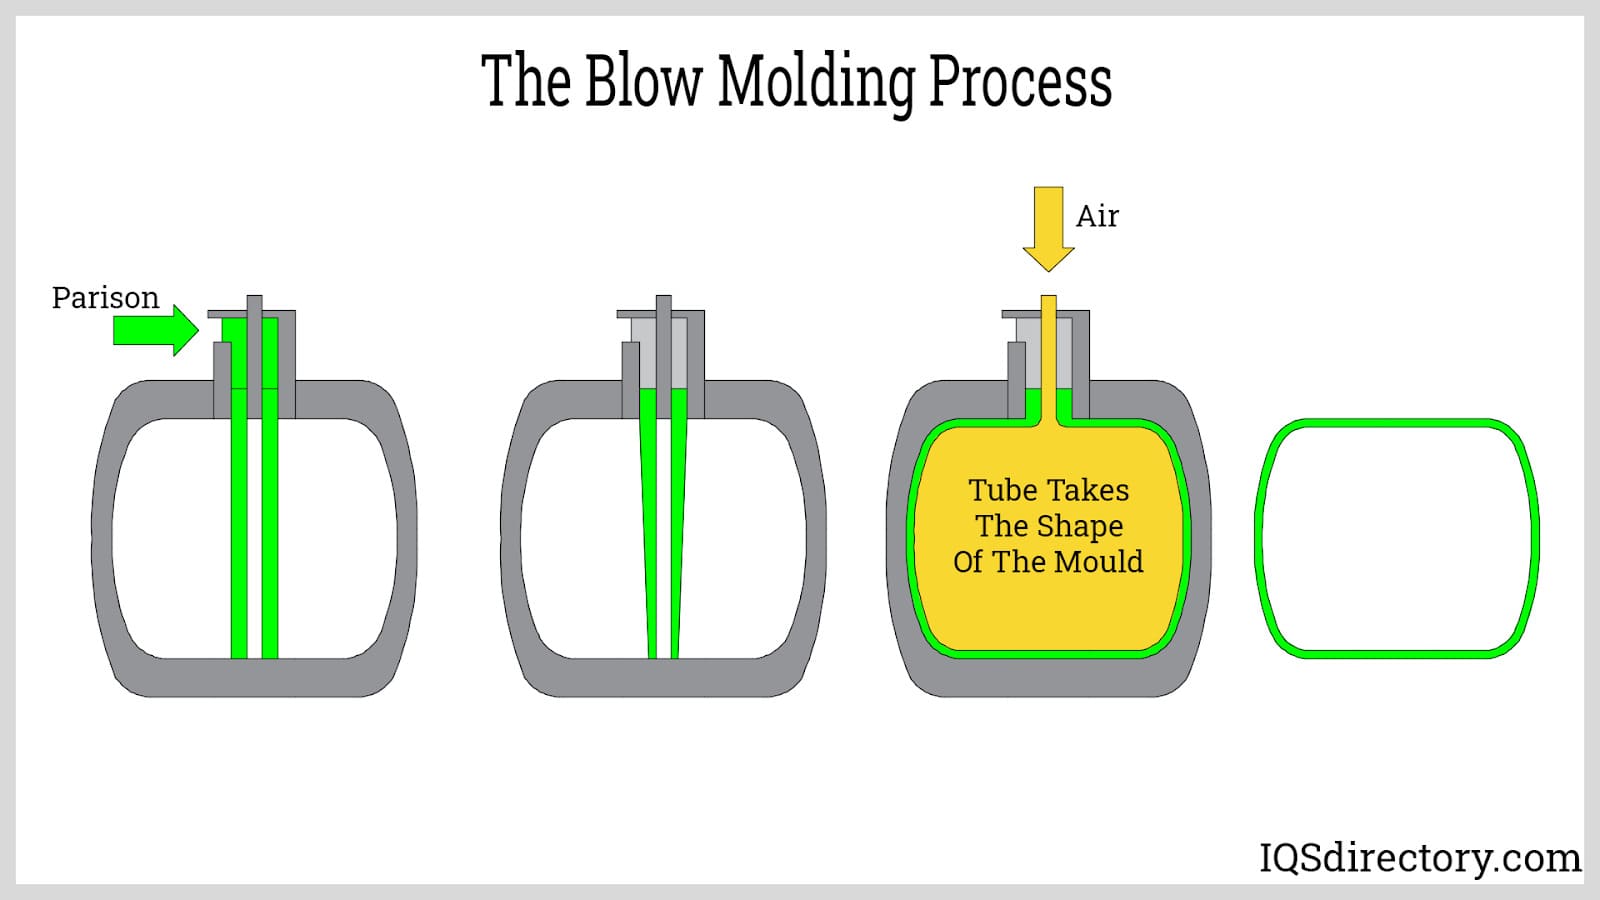 The Blow Molding Process